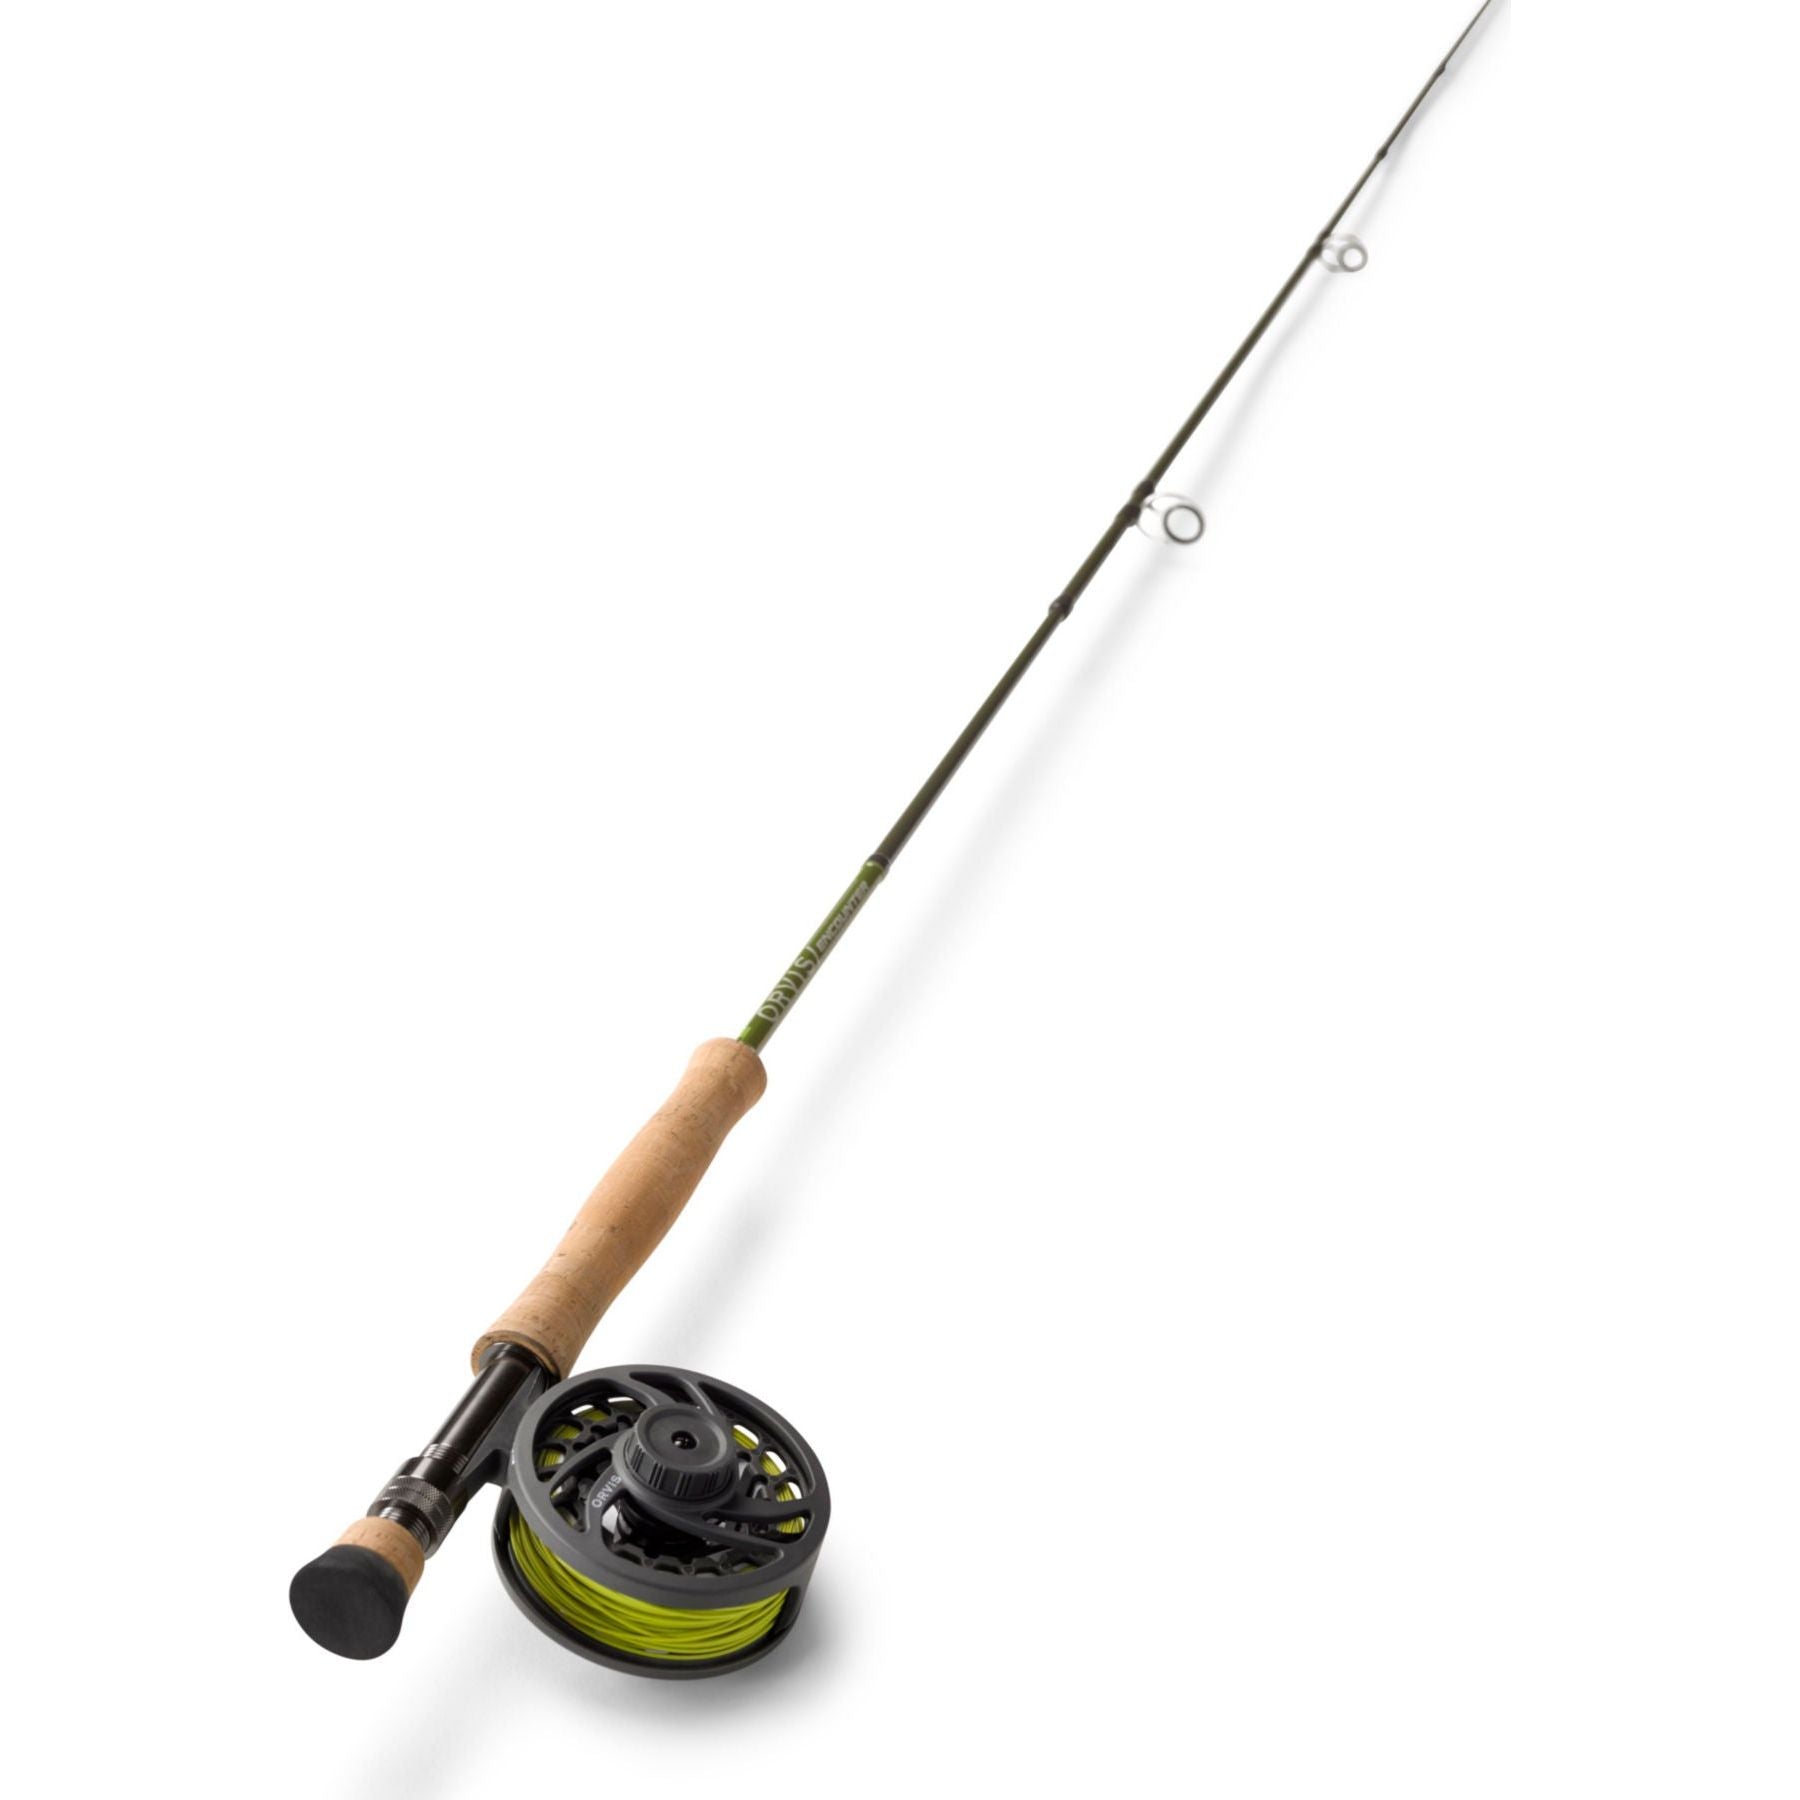 ORVIS ENCOUNTER  9’ FLY ROD OUTFIT